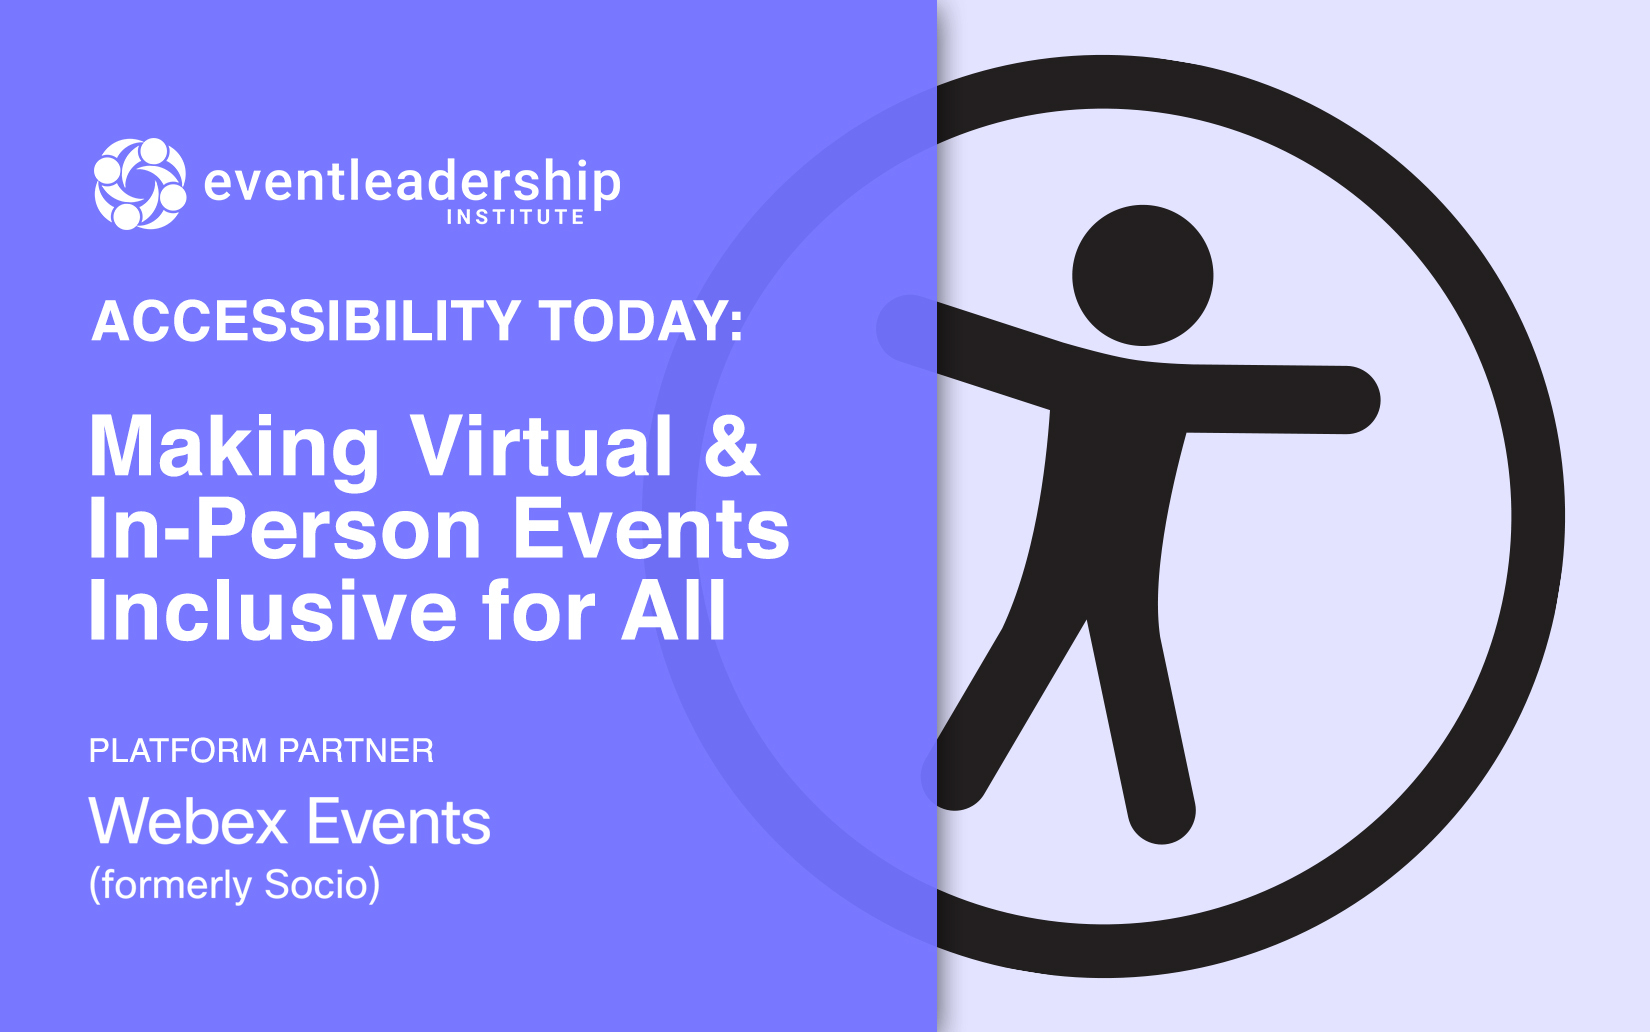 Event Leadership Institute combination mark with the text "Accessibility Today: ﻿Making Virtual and In-Person Events Inclusive for All